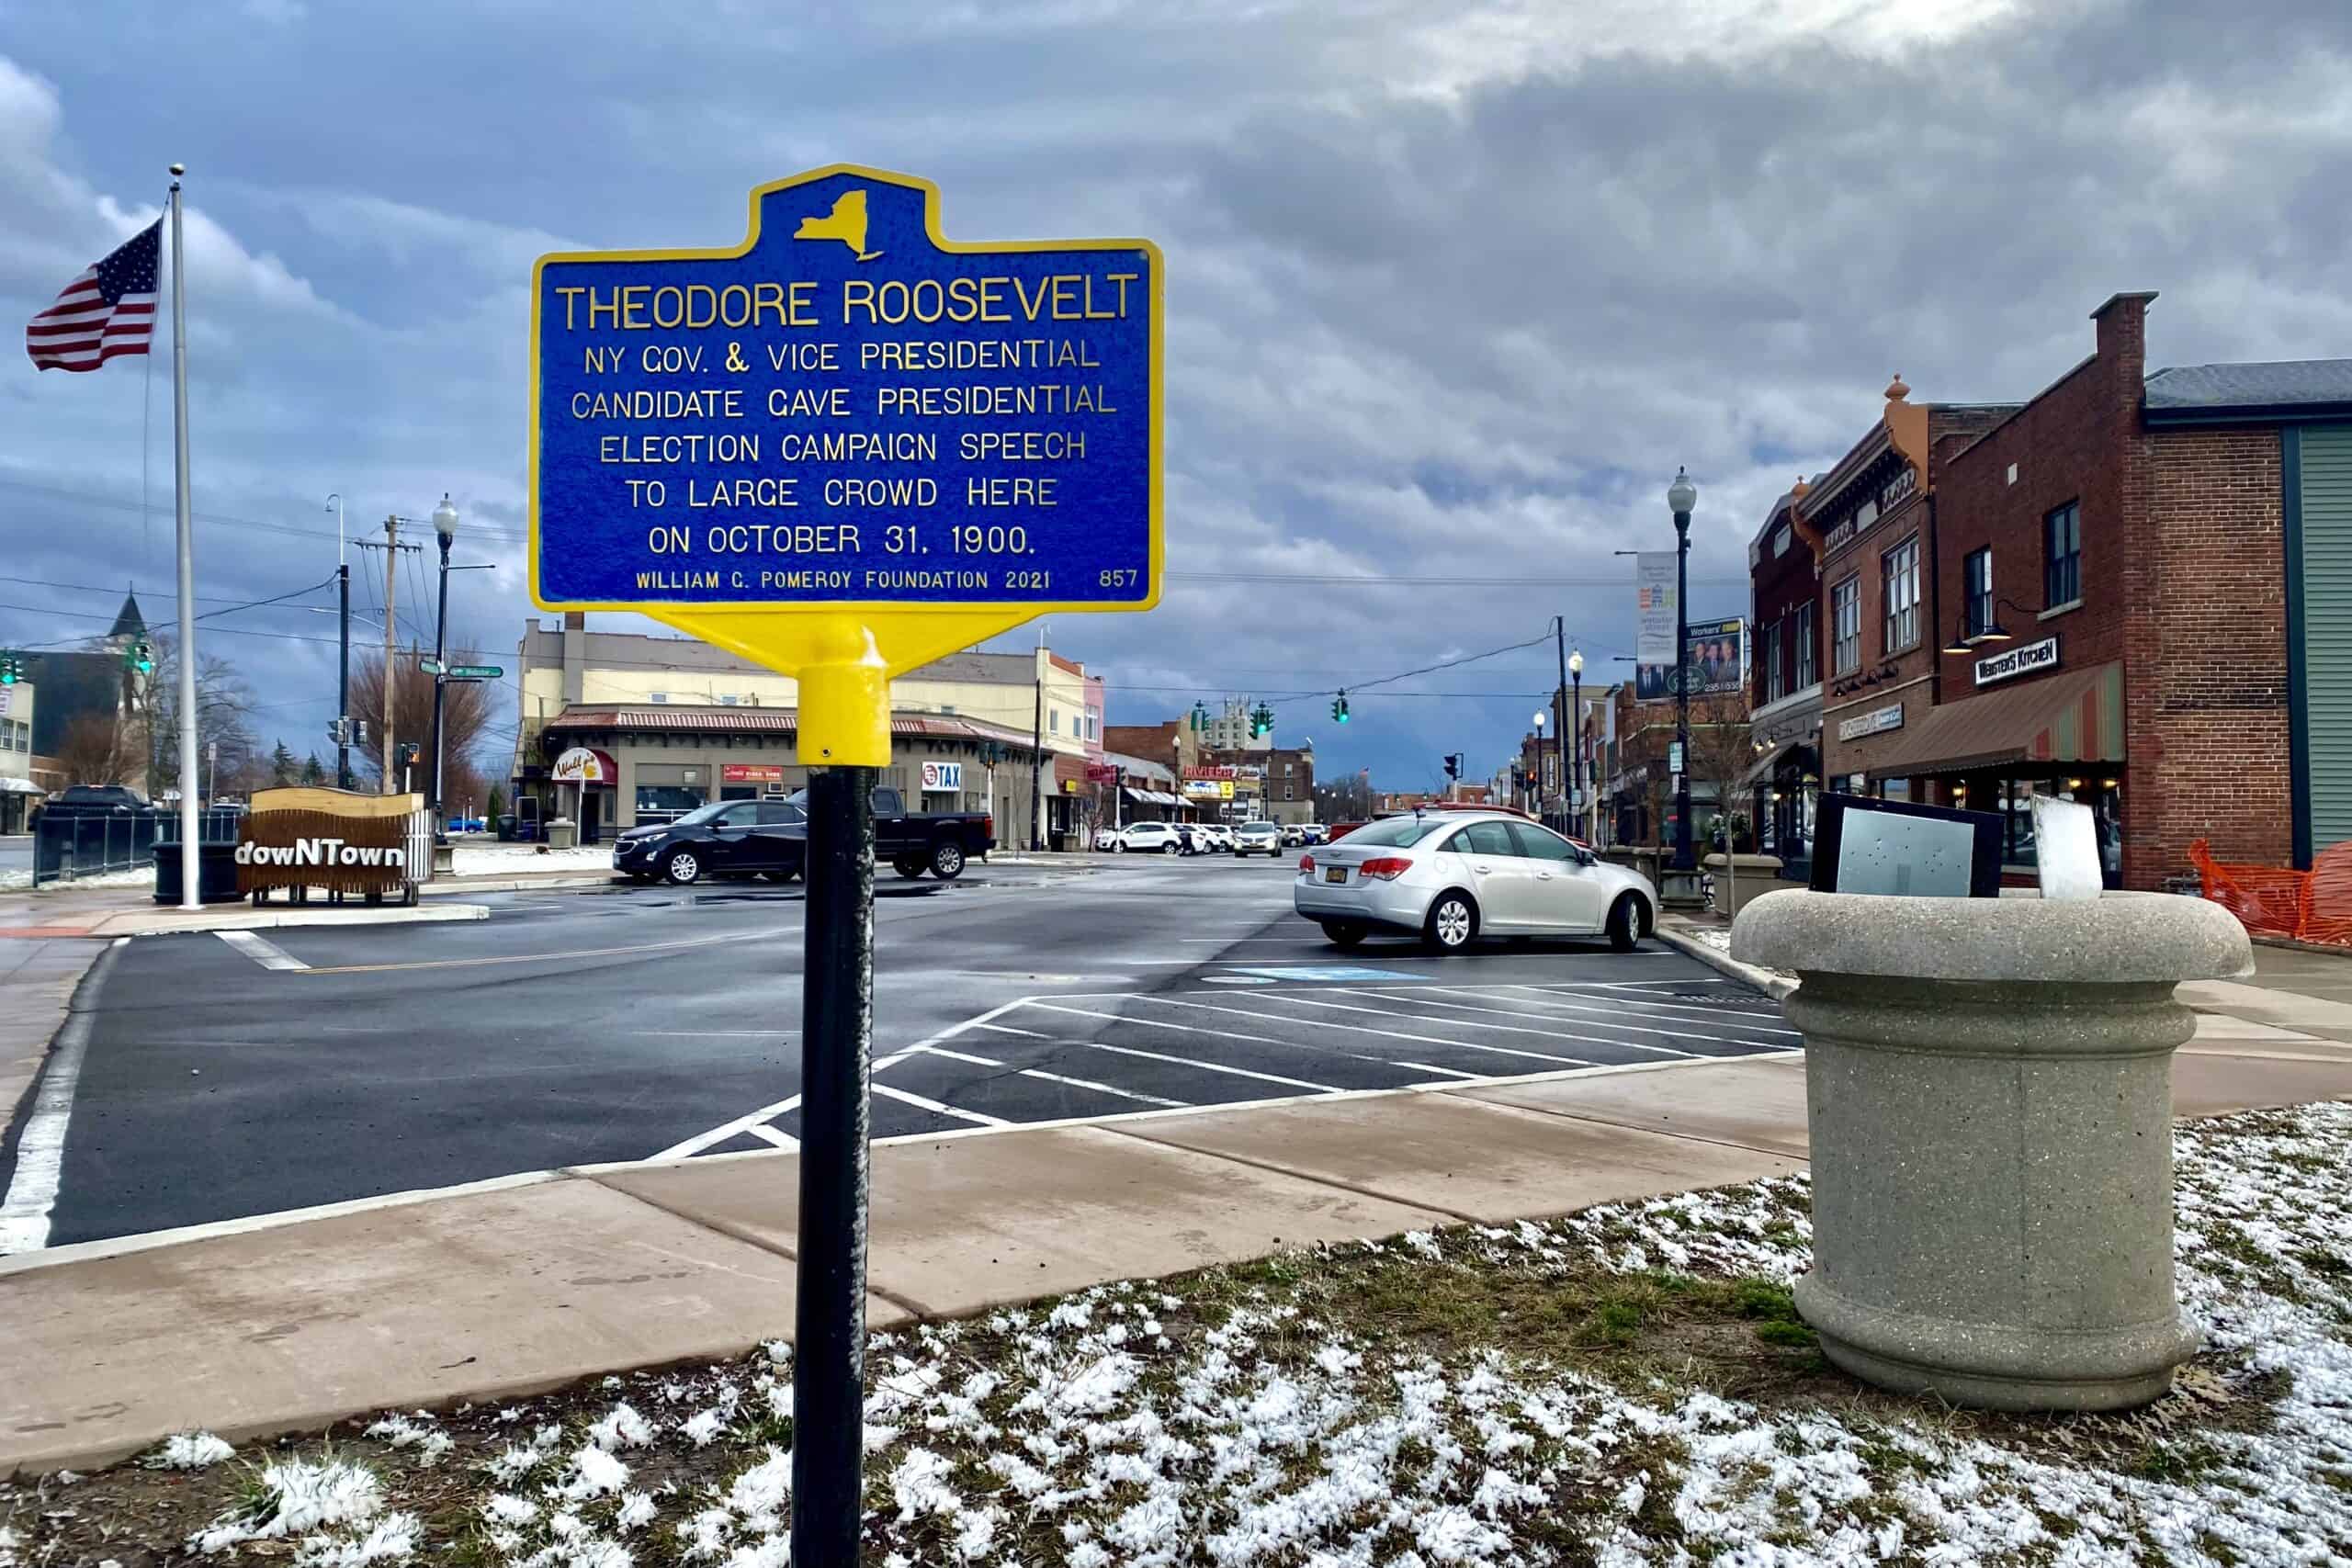 Theodore Roosevelt historical marker at north end of Webster Street, North Tonawanda, New York - 20230329 by Andre Carrotflower